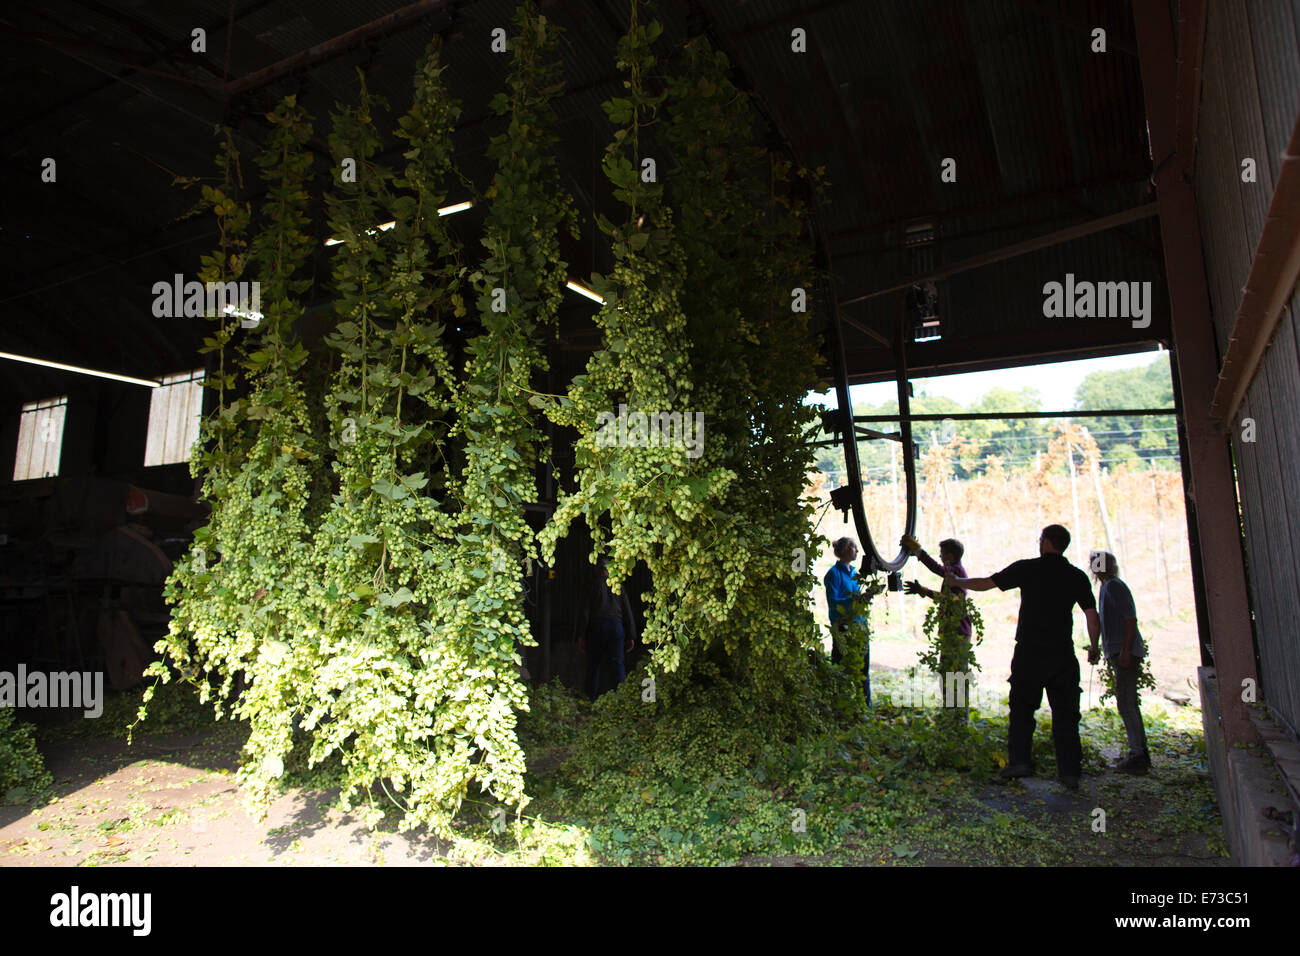 Hops being harvested ready to be exported to breweries for beer production, Hampton Estate, Surrey Hills, England, UK Stock Photo